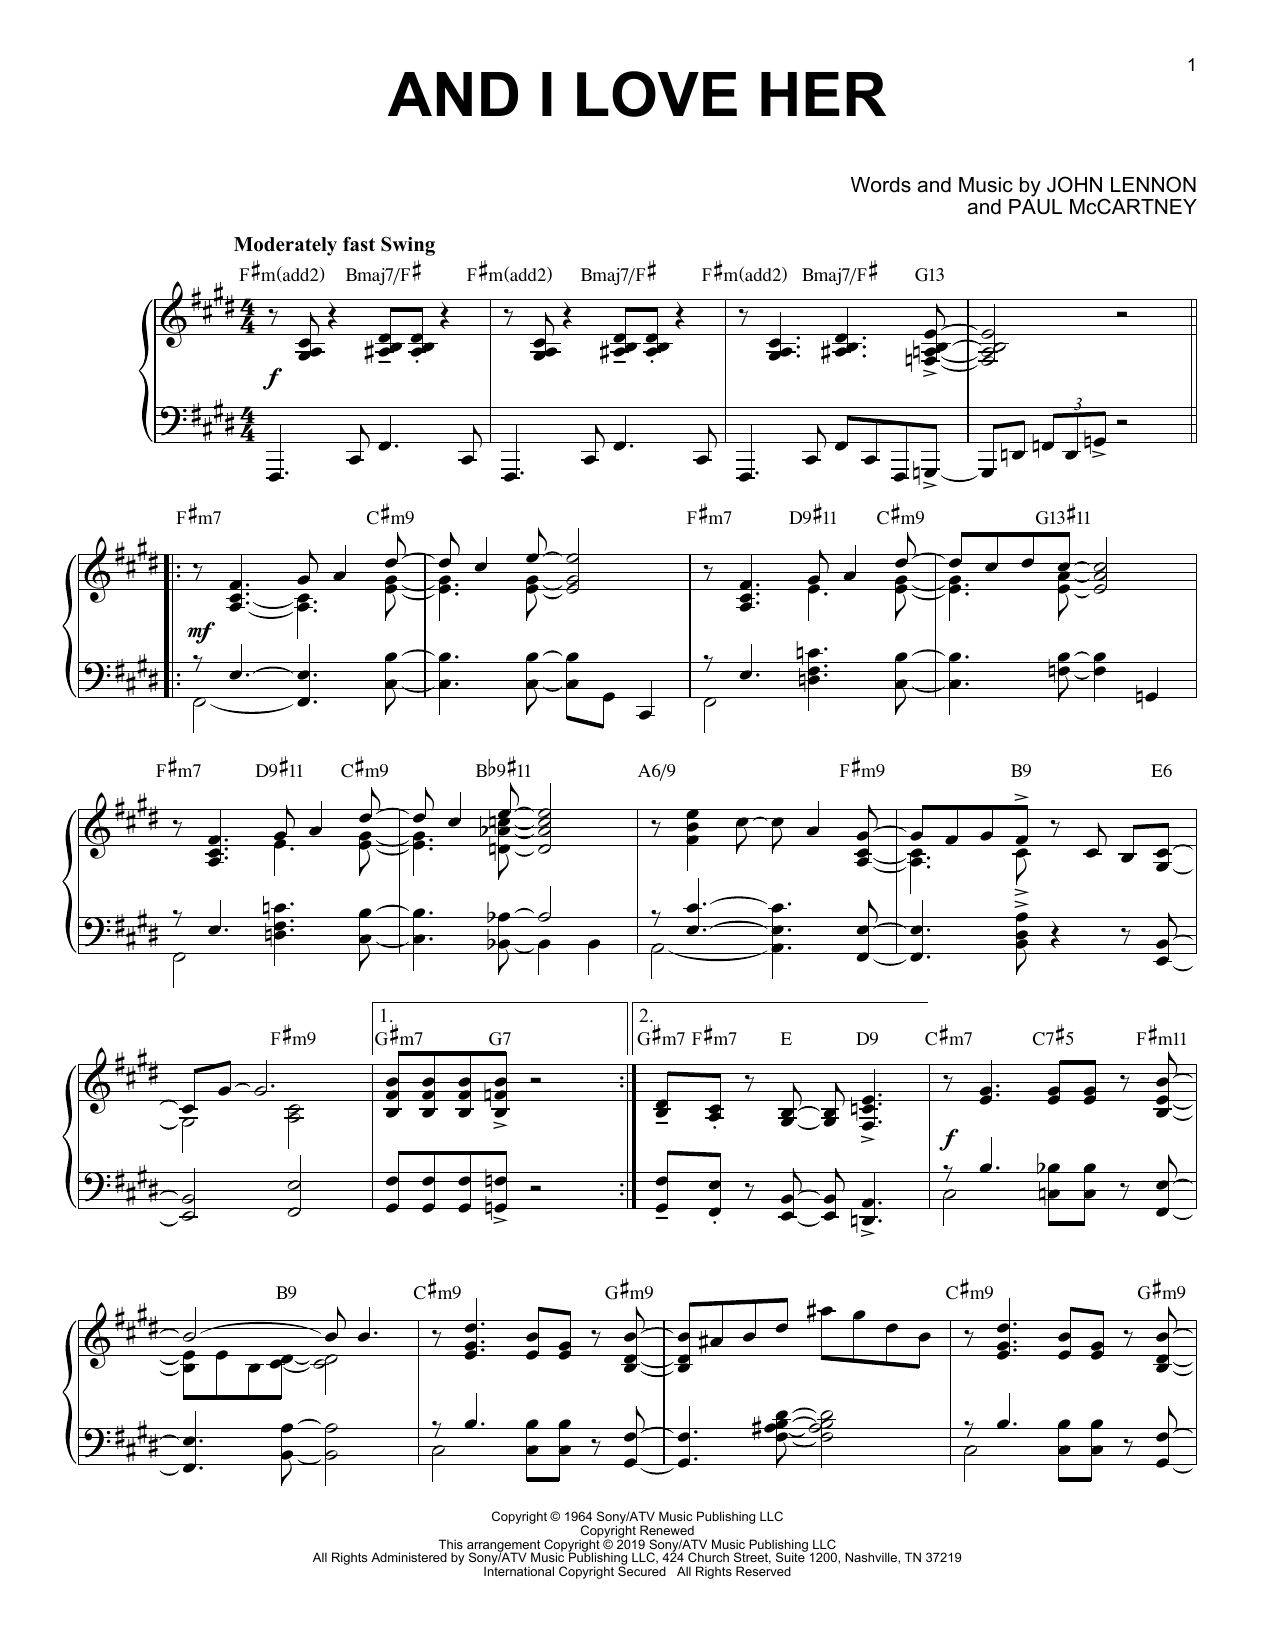 Download The Beatles And I Love Her [Jazz version] Sheet Music